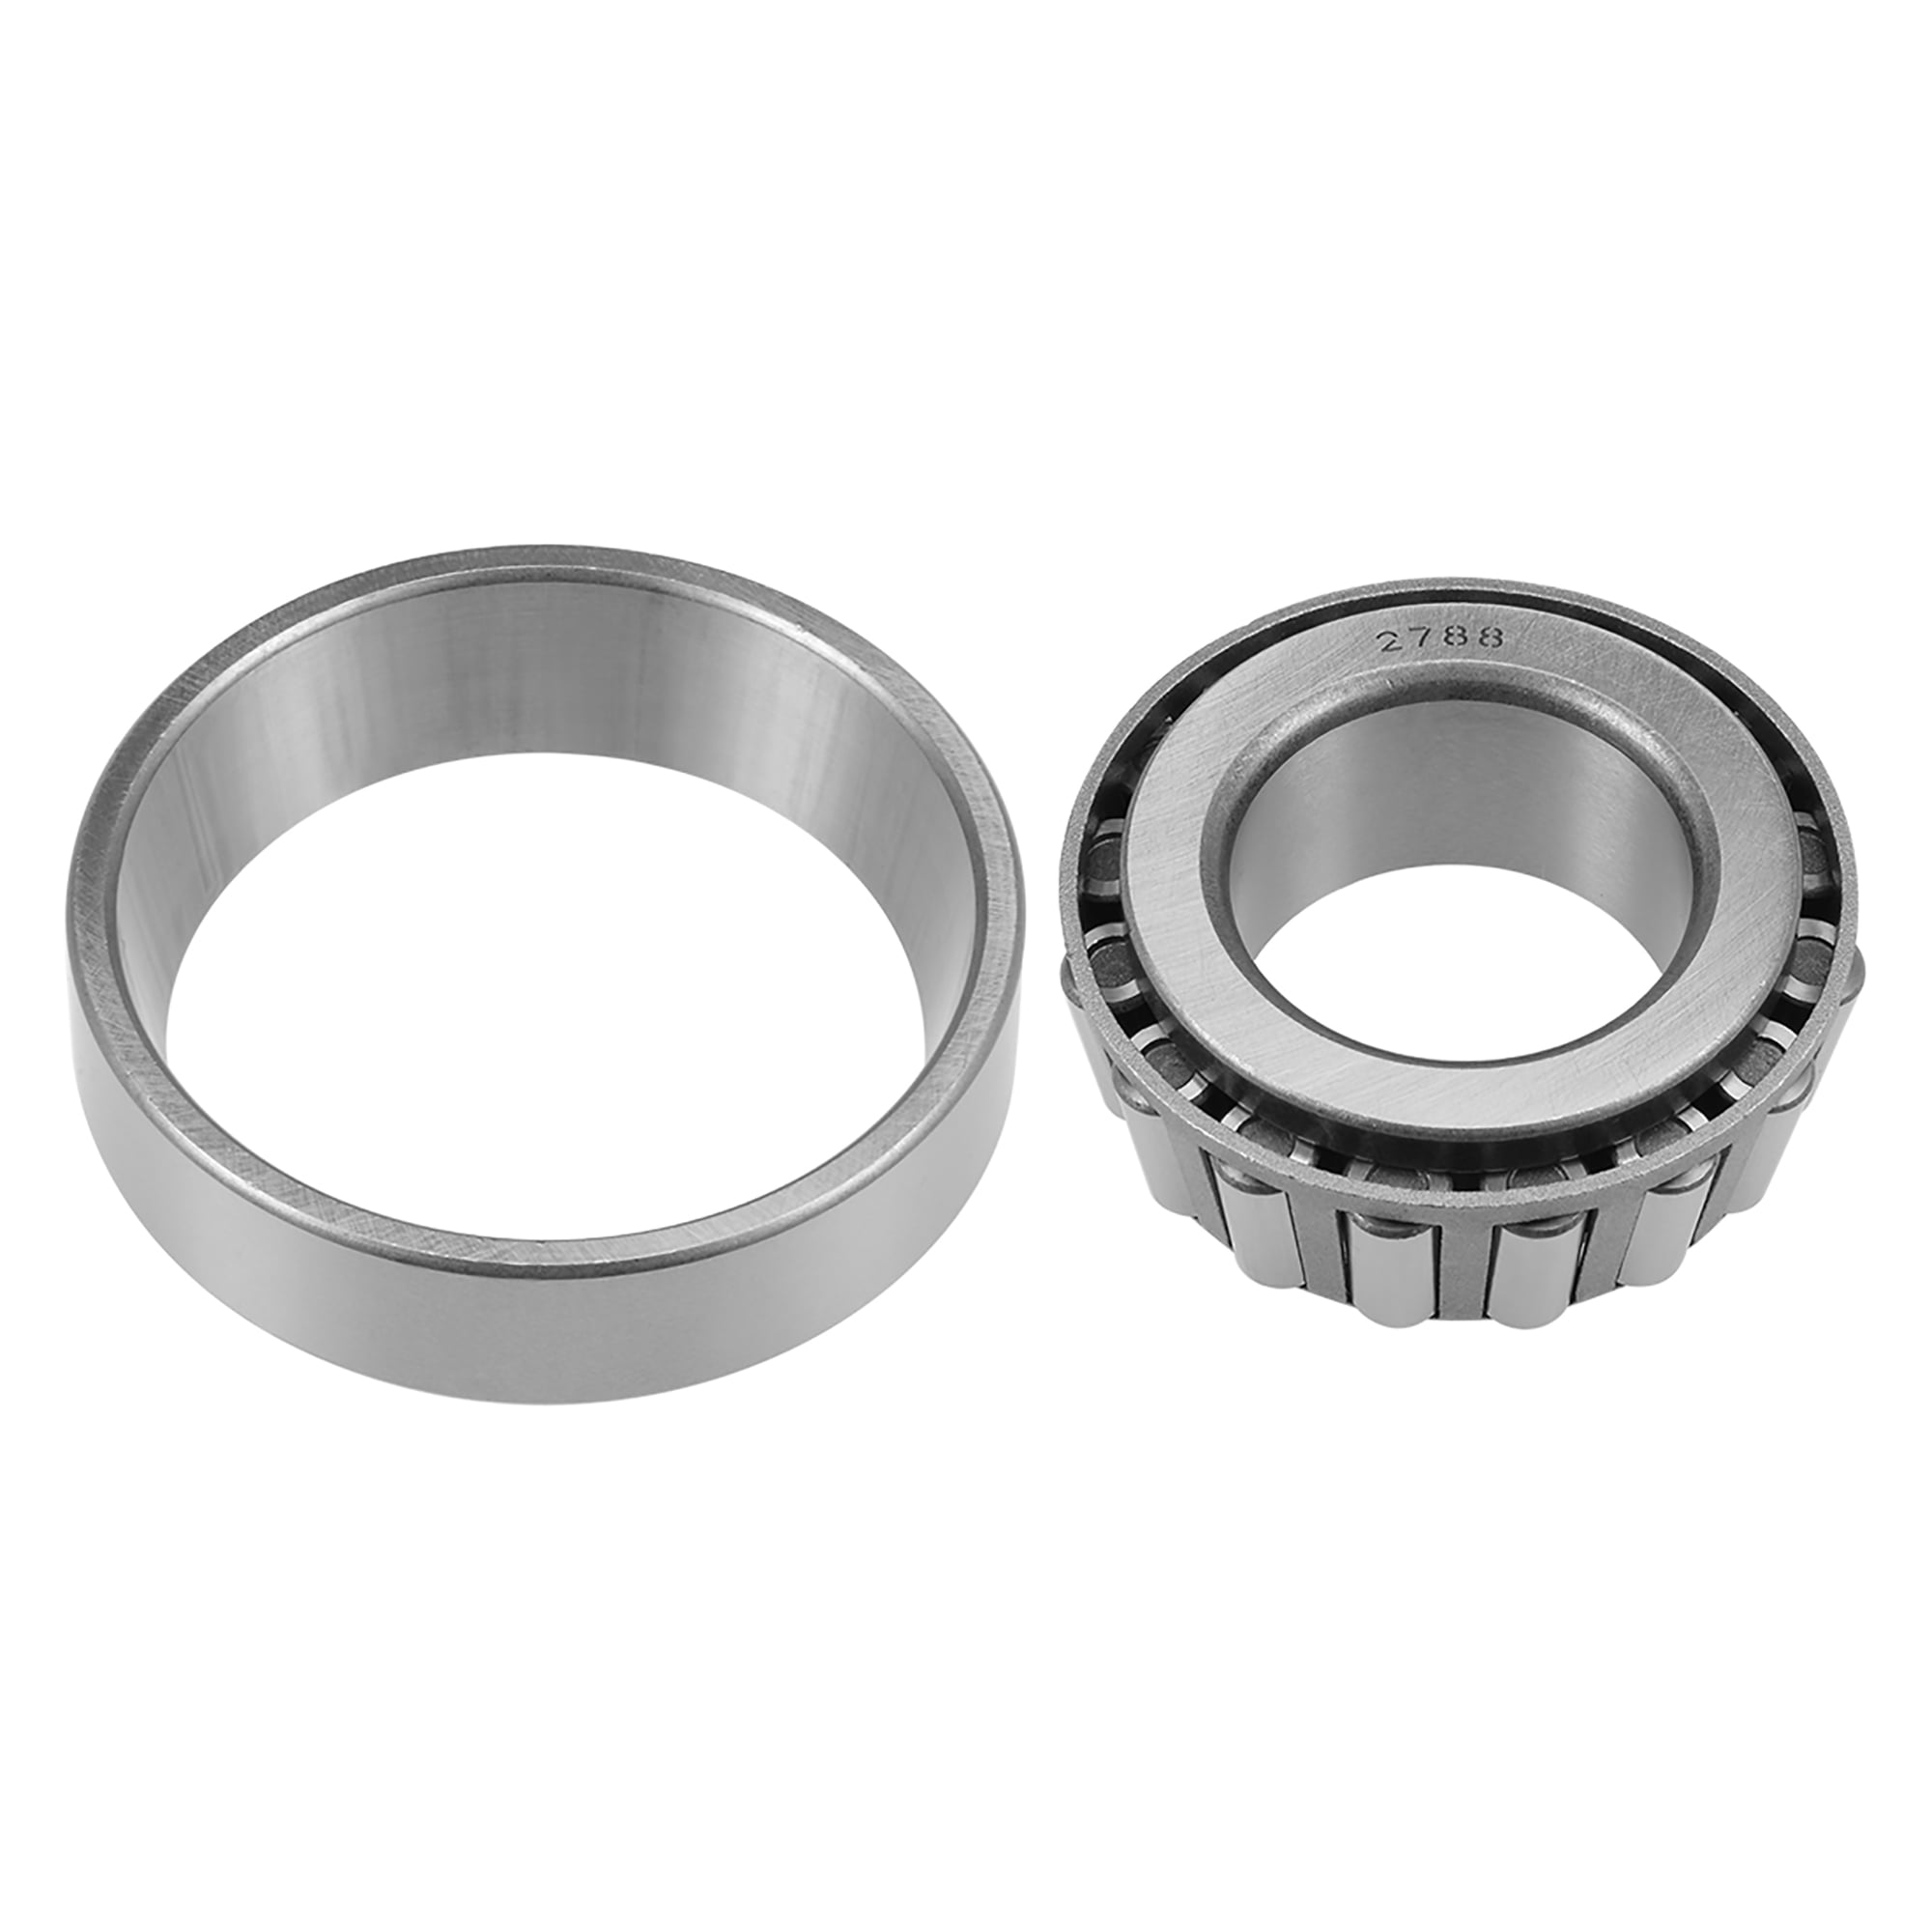 2788/2720 Tapered Roller Bearing Cone and Cup Set 1.5" Bore 3" O.D 1.01" Width 